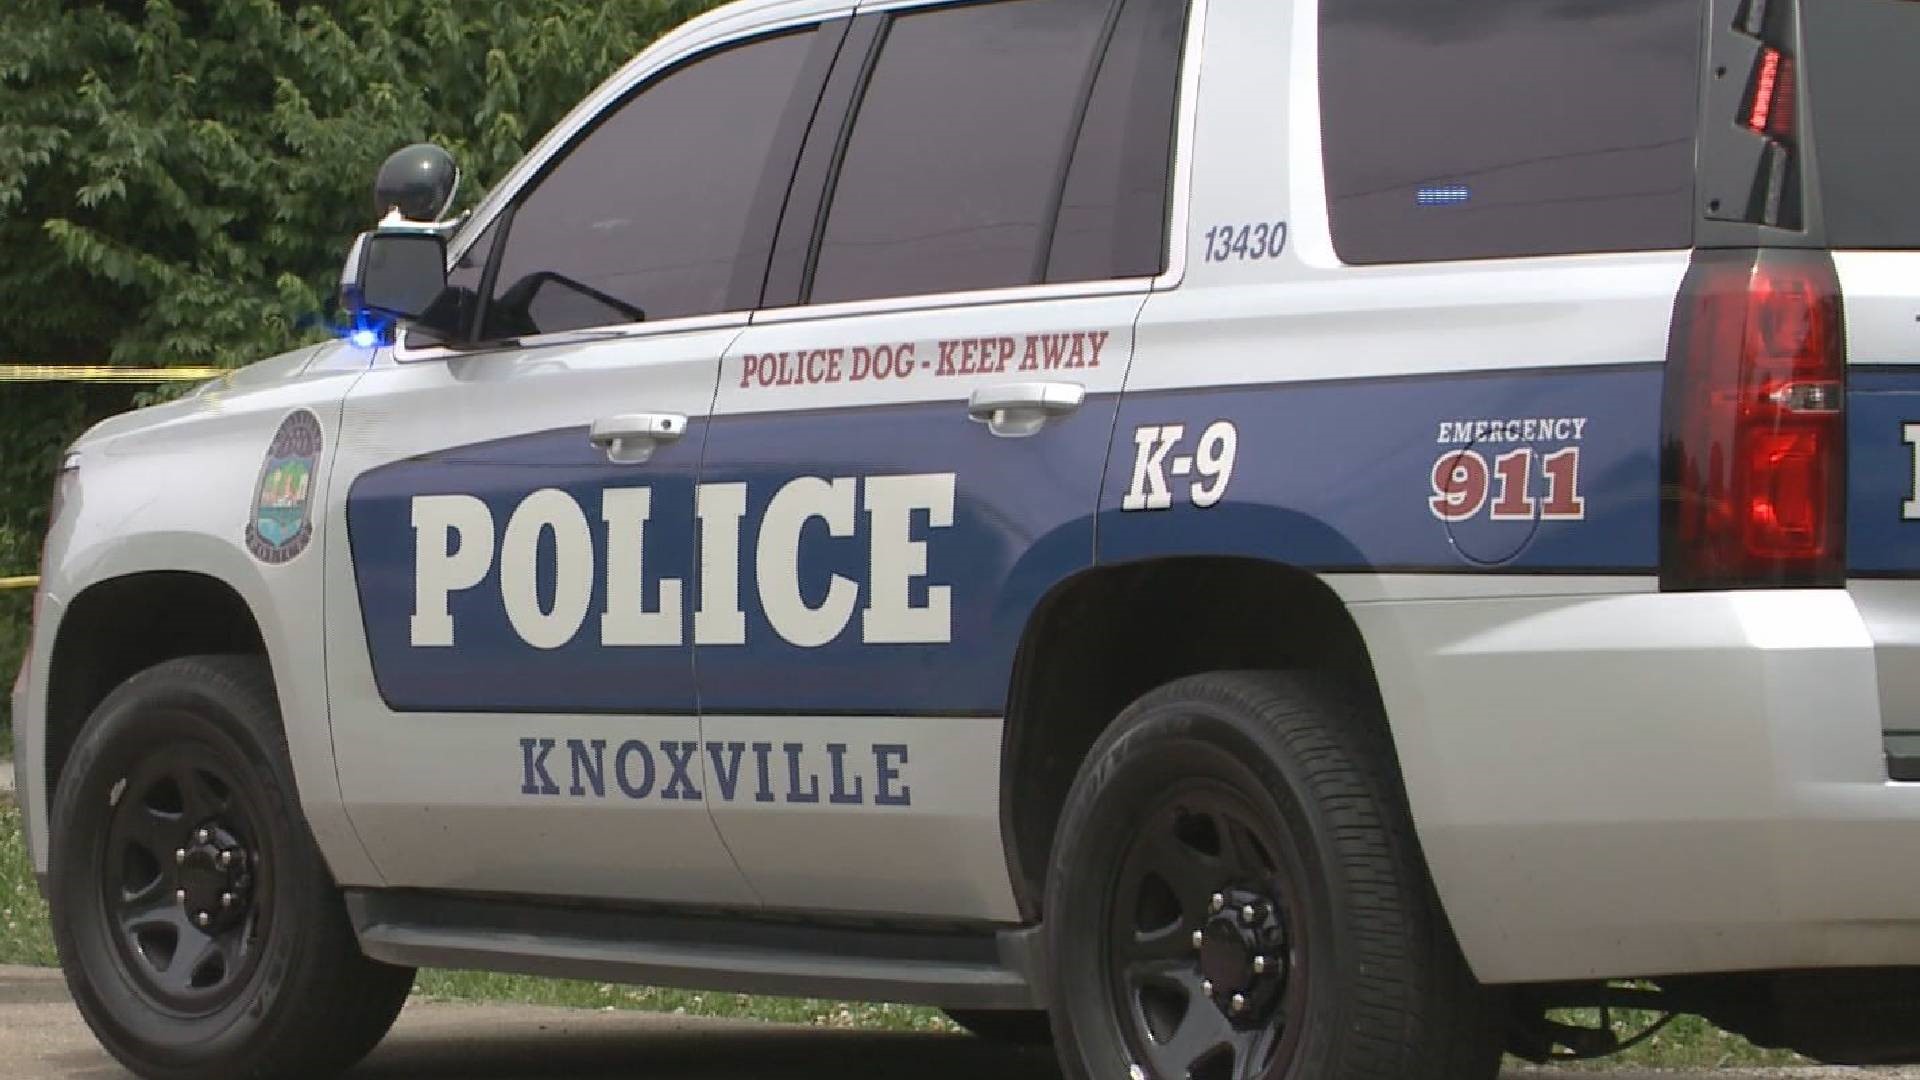 Officers responded to the shooting, which occurred outside of a house, at around 2 a.m., according to the Knoxville Police Department.